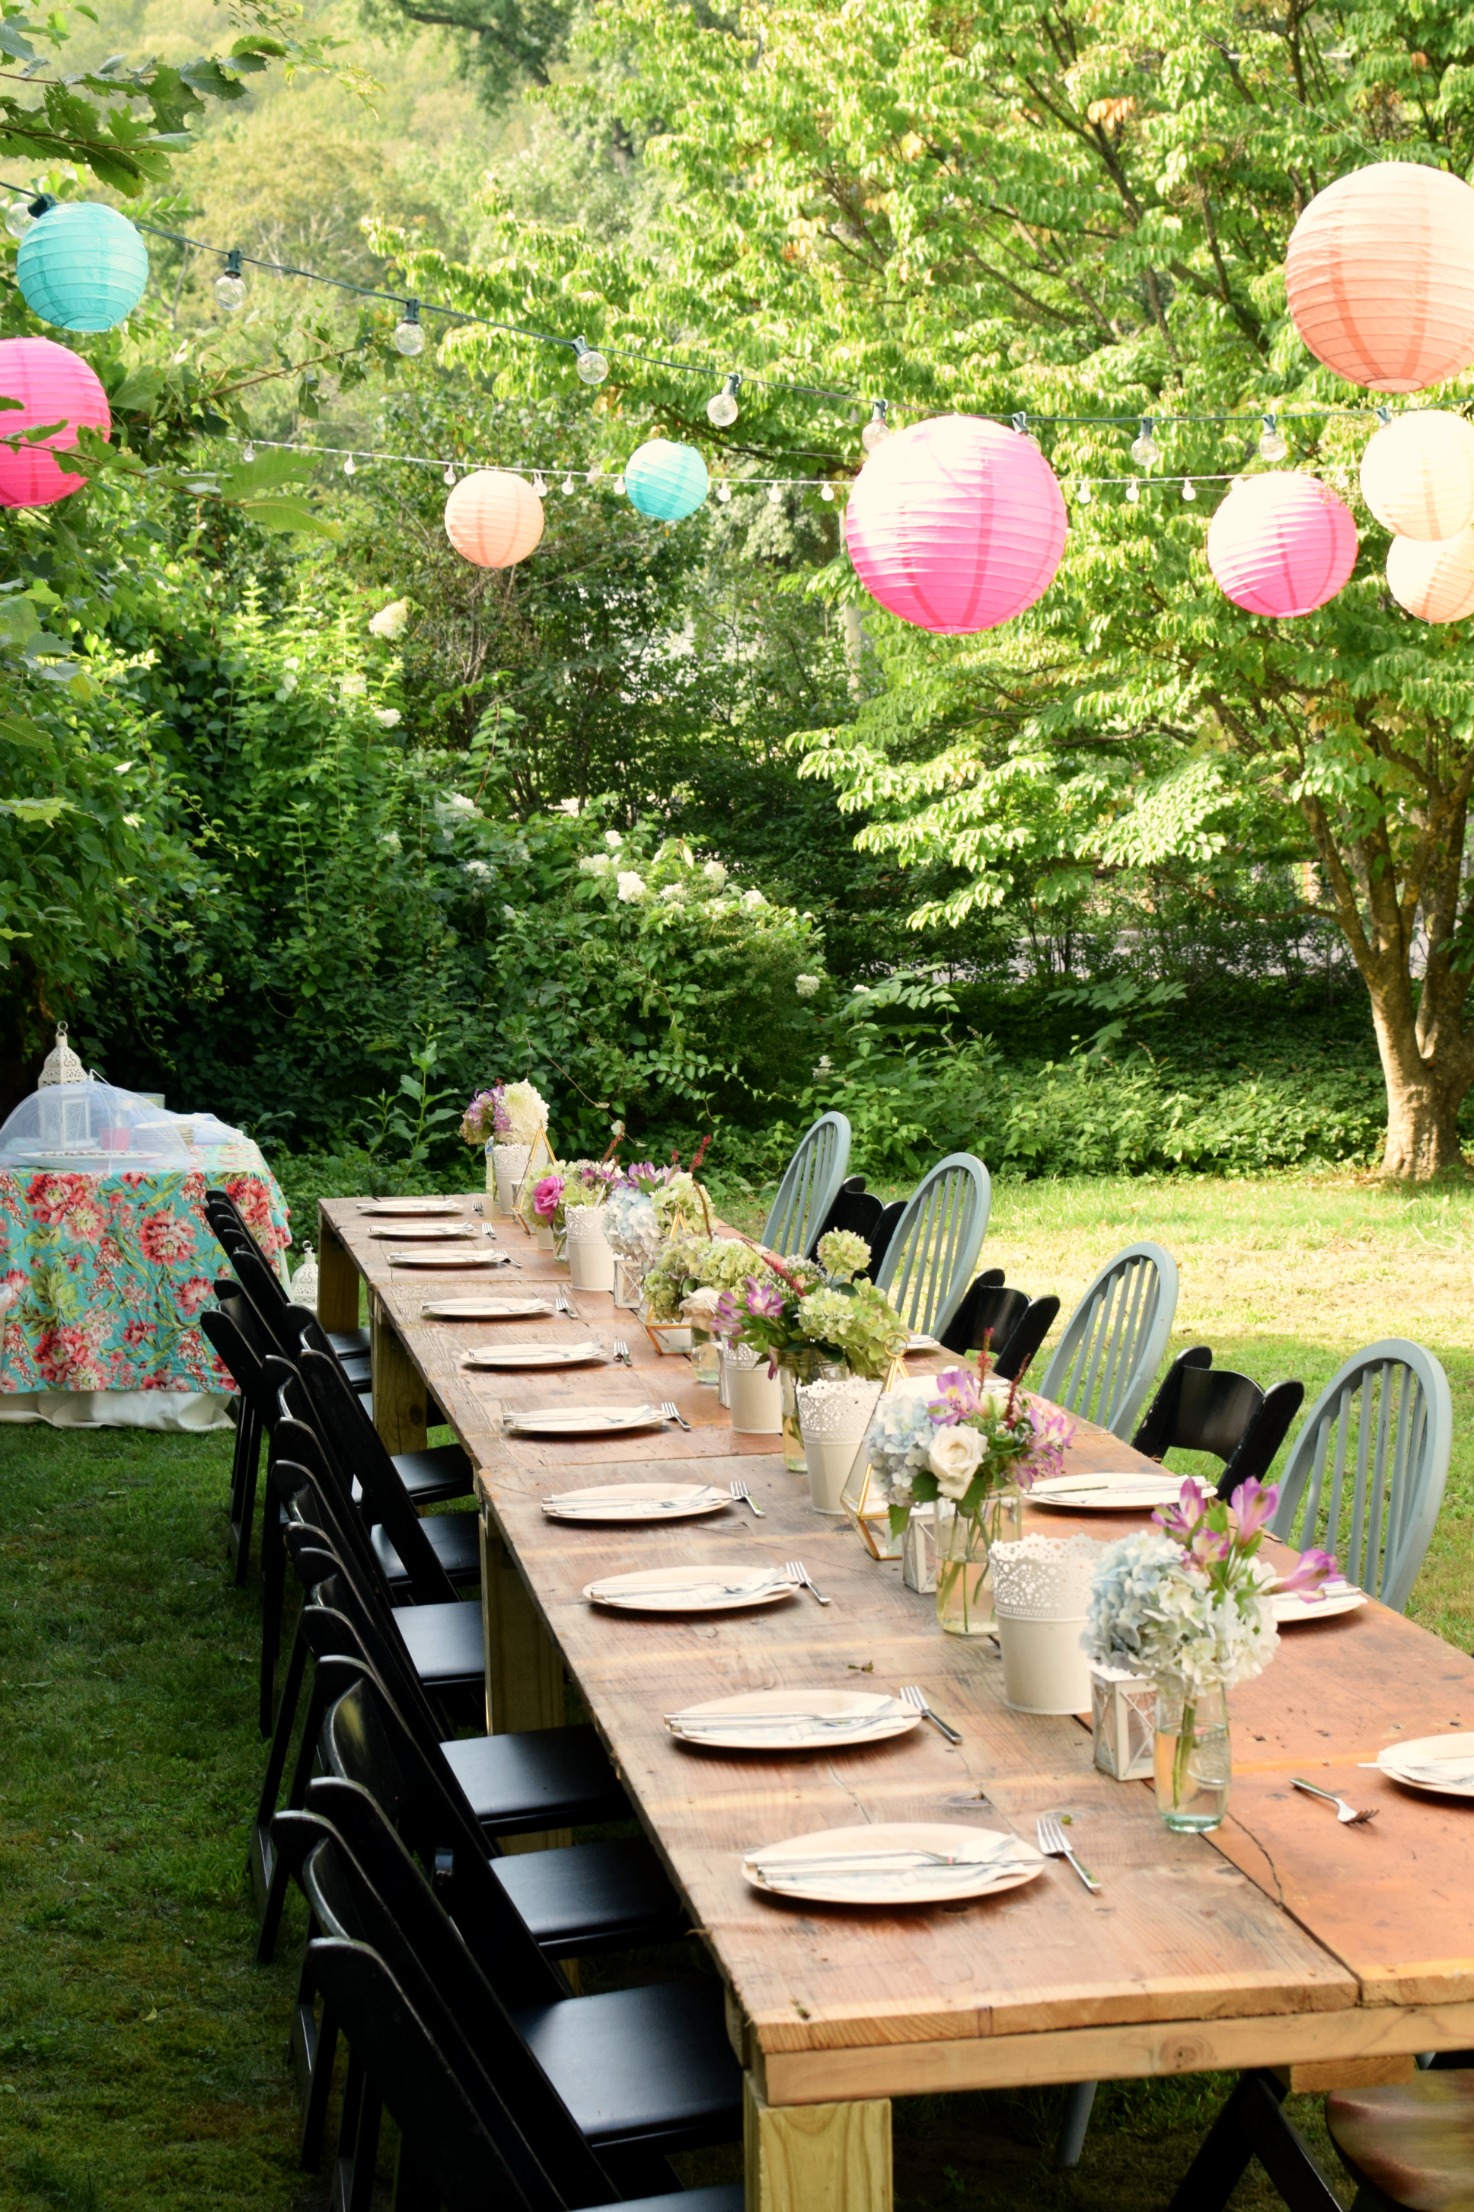 Charming Garden Party, perfect for your next party idea.